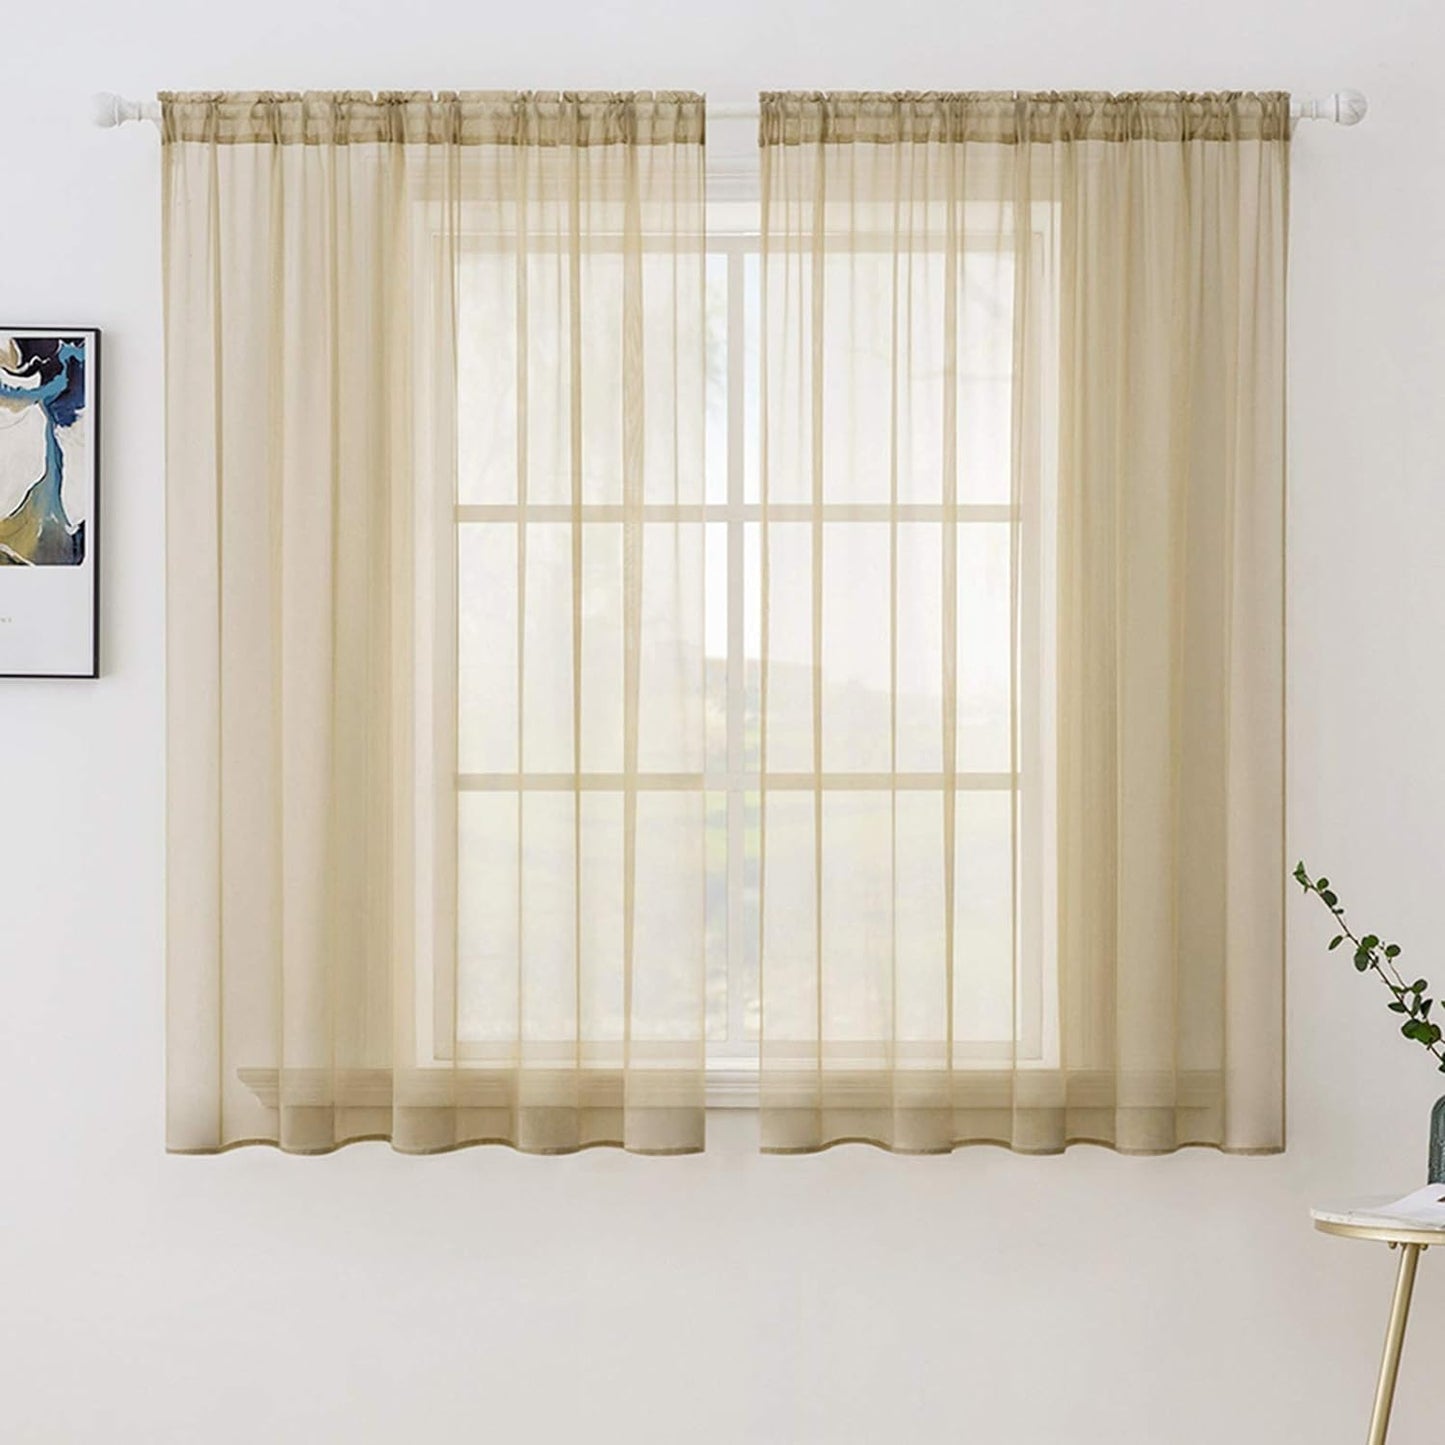 MIULEE White Sheer Curtains 96 Inches Long Window Curtains 2 Panels Solid Color Elegant Window Voile Panels/Drapes/Treatment for Bedroom Living Room (54 X 96 Inches White)  MIULEE Beige 54''W X 45''L 